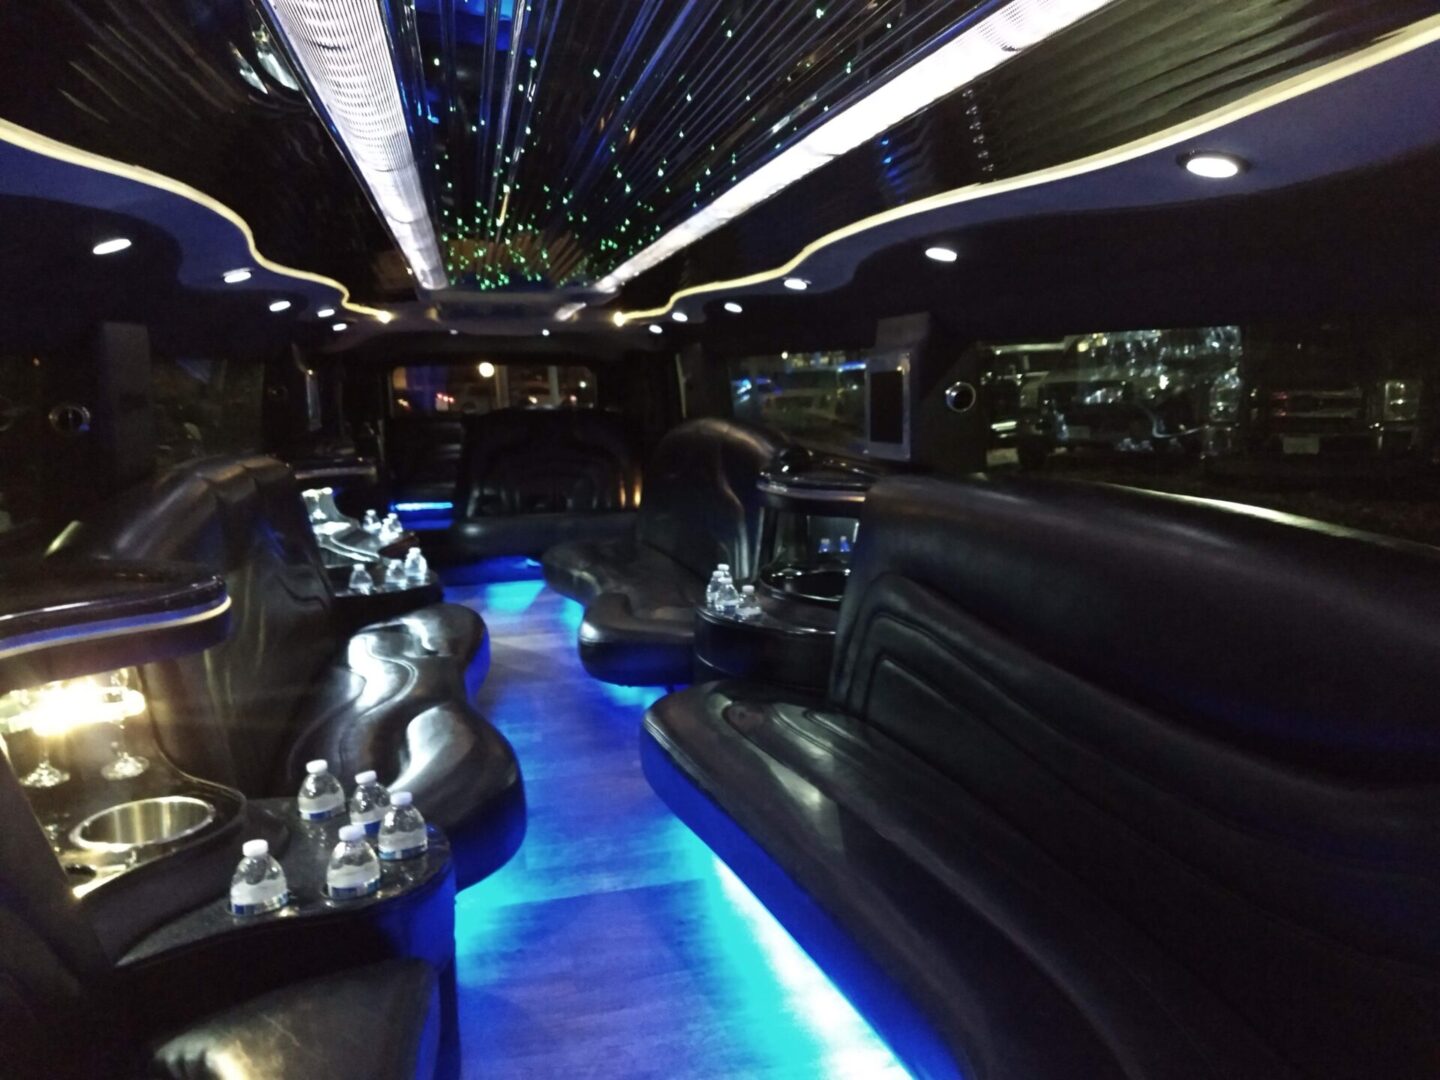 interior lighting and seating inside the hummer